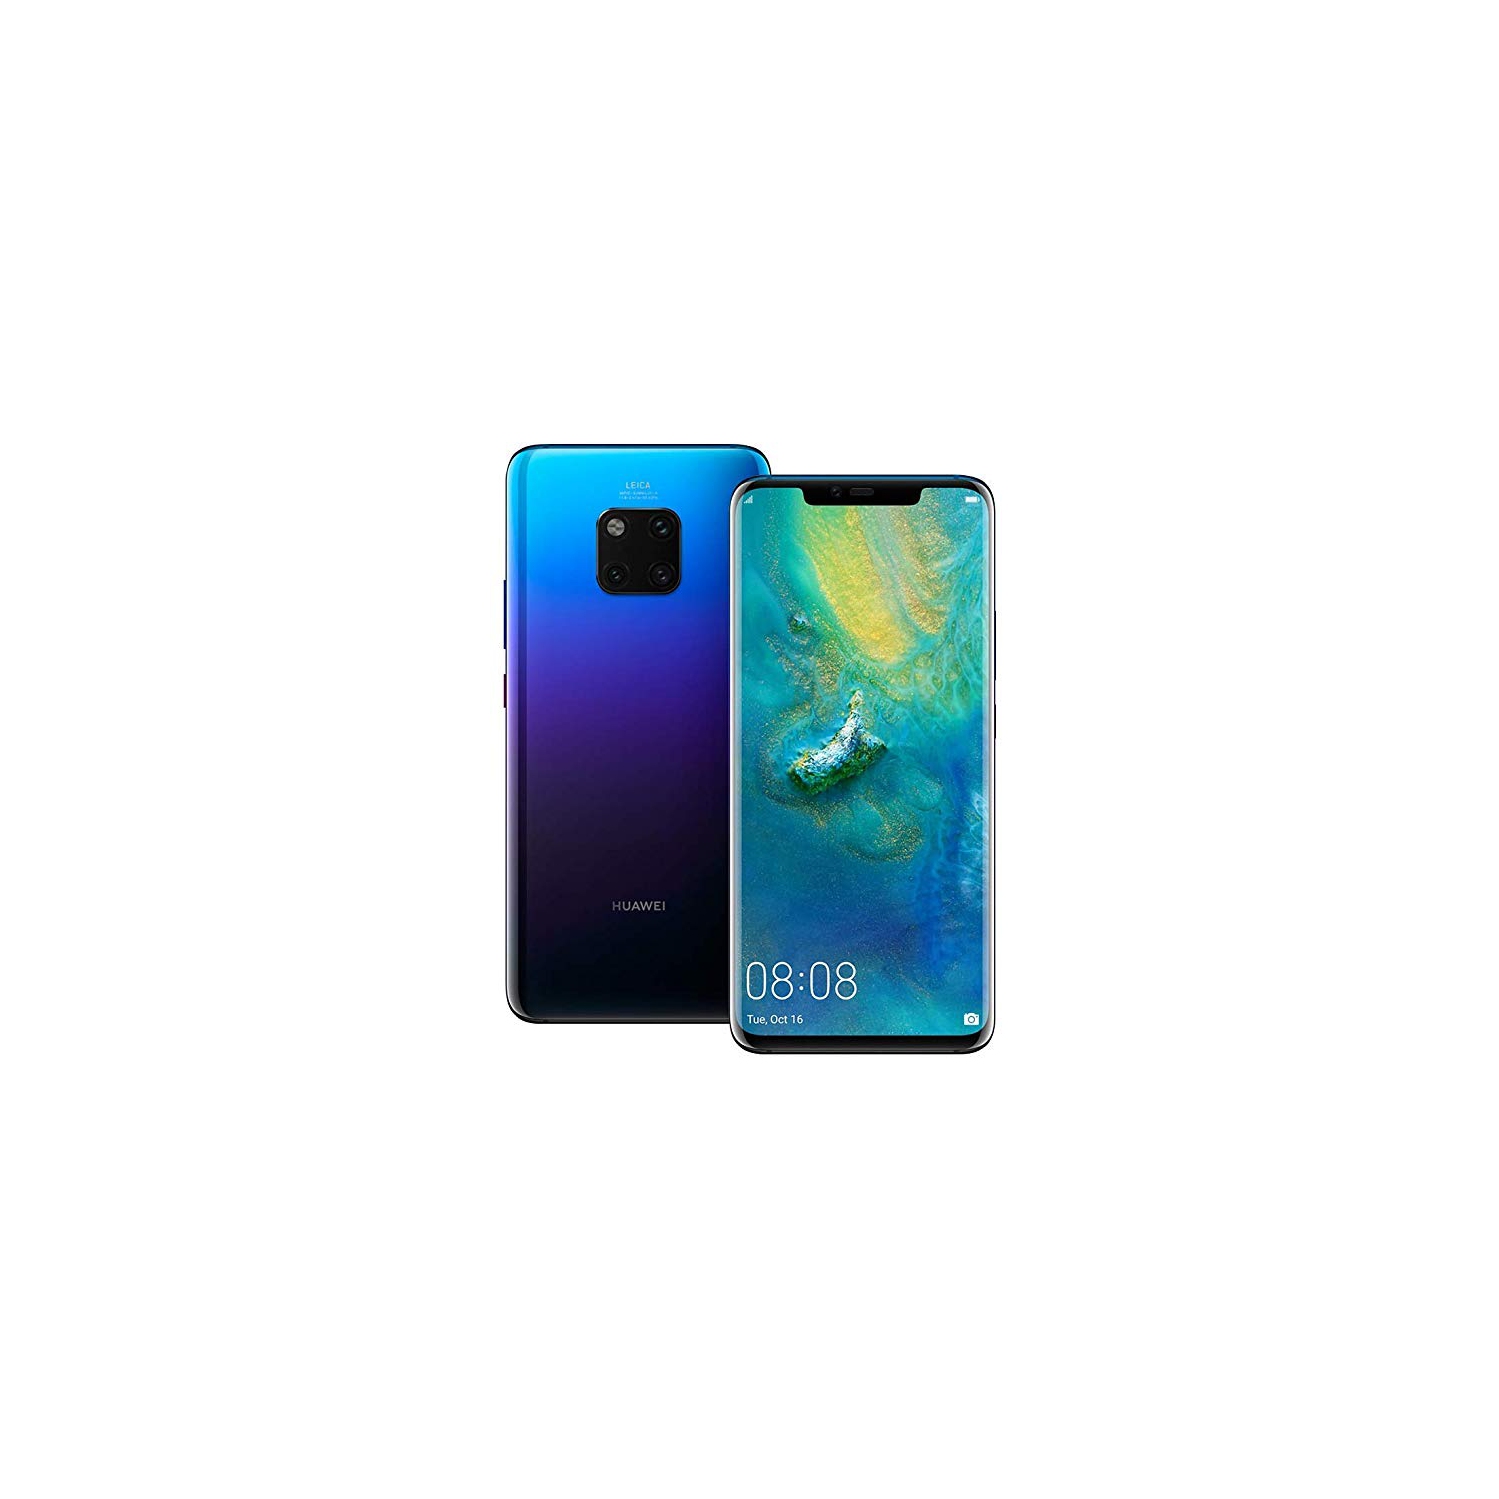 Huawei Mate 20 Pro 128GB Smartphone - Twilight - Unlocked - Certified Pre-Owned